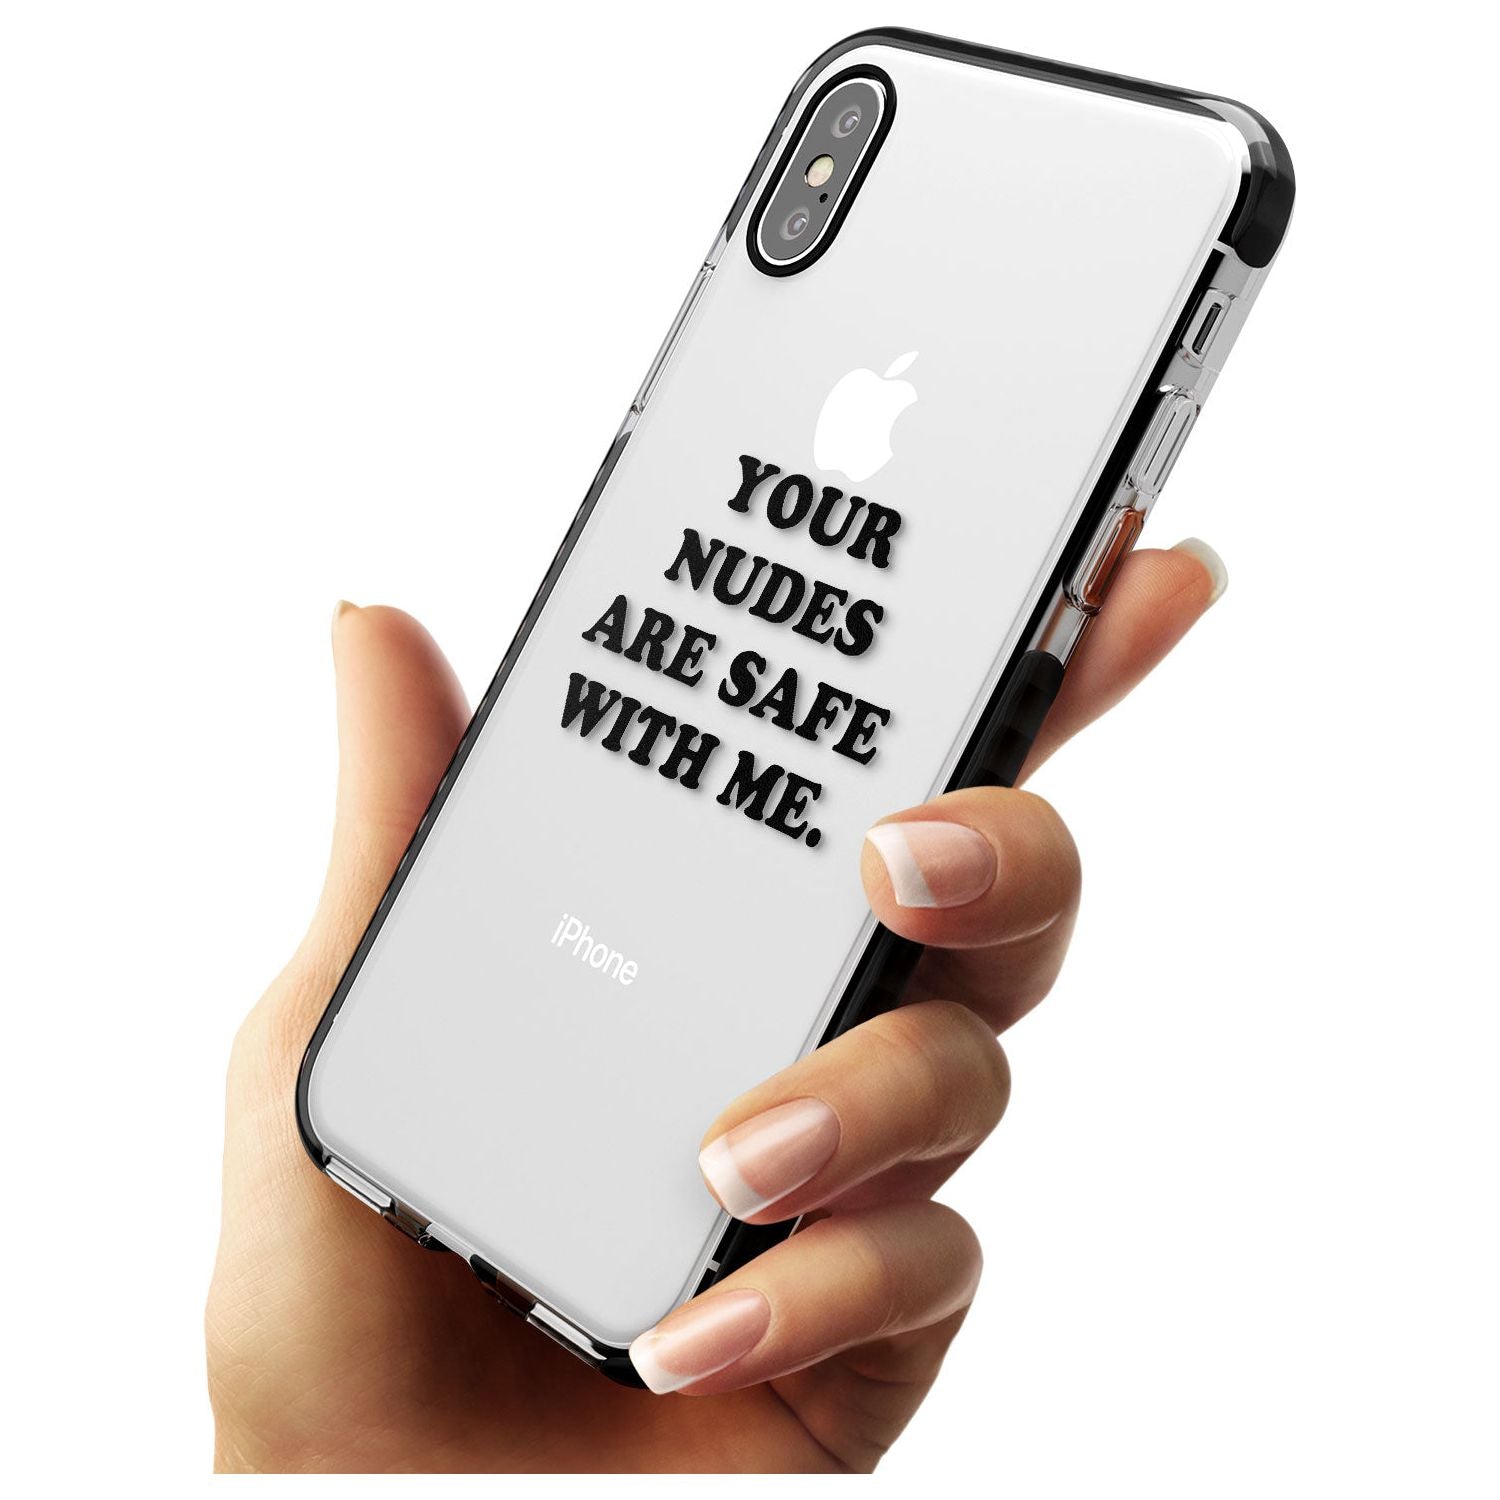 Your nudes are safe with me... BLACK Black Impact Phone Case for iPhone X XS Max XR